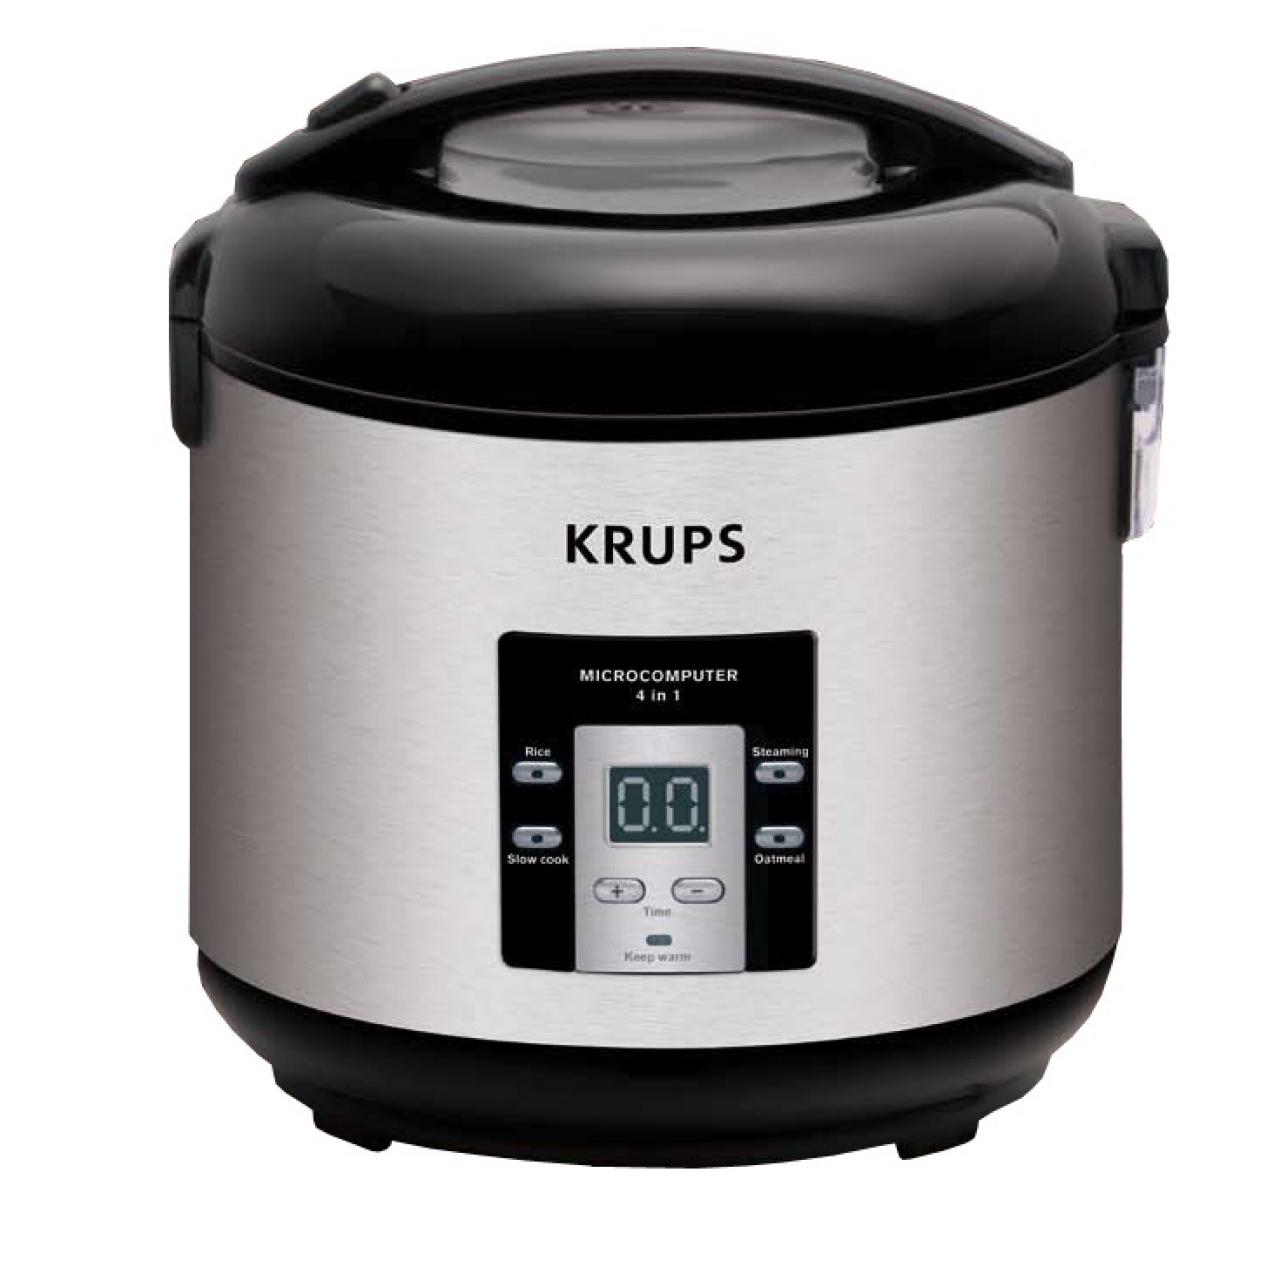 The Best Rice Cooker I've Ever Owned